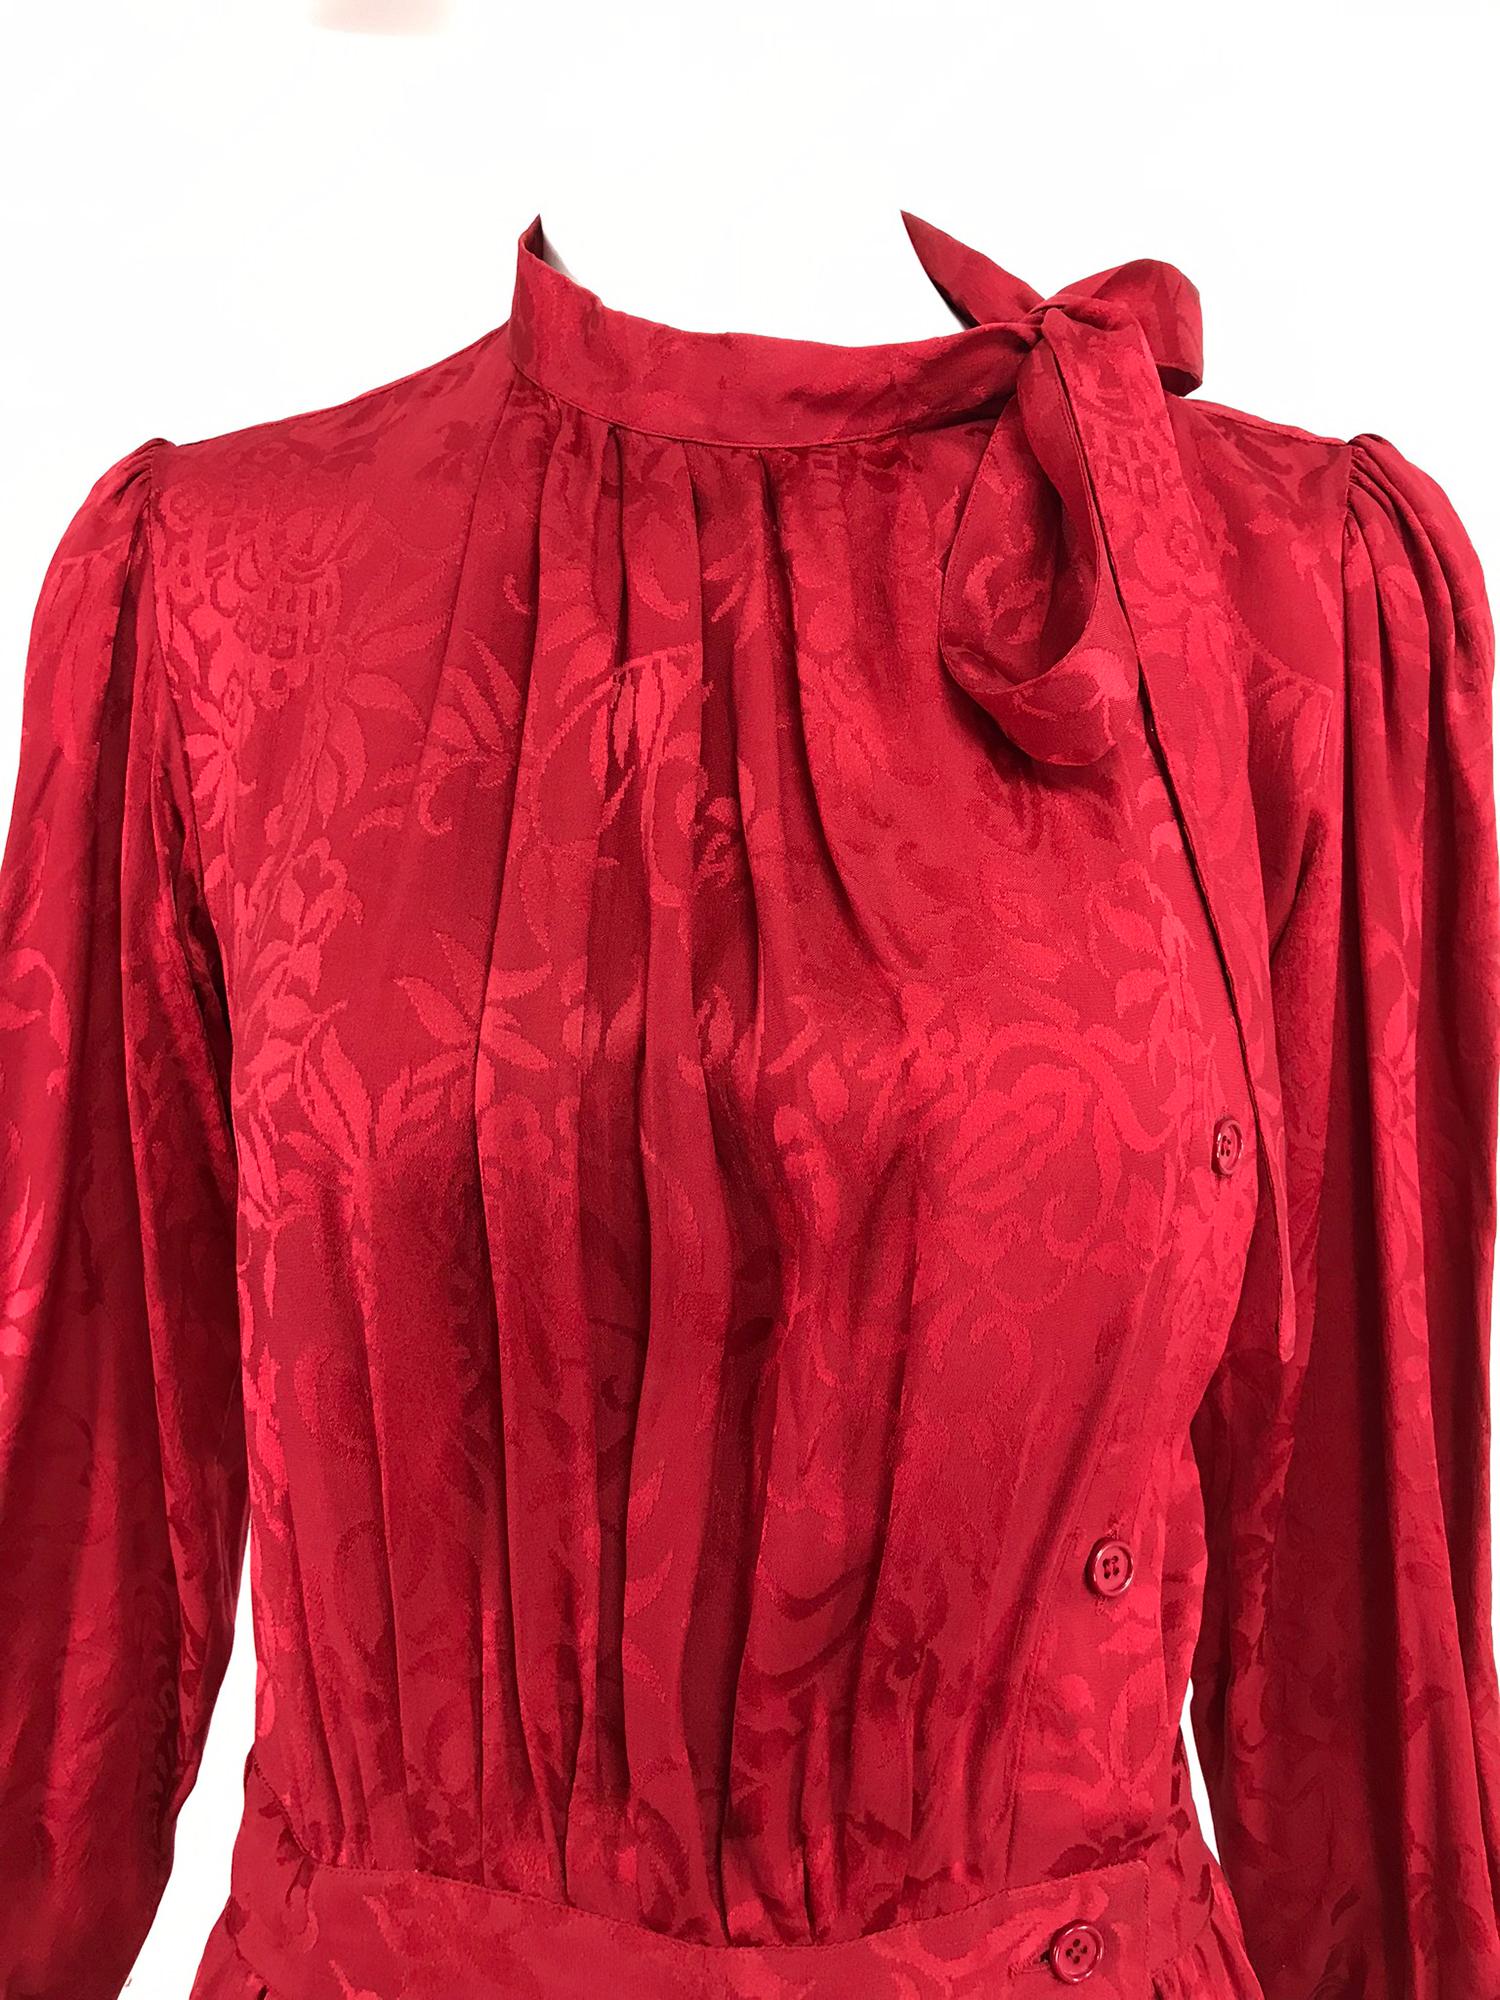 Yves Saint Laurent red silk jacquard bow tie dress from the  1970s. Candy apple red floral figured silk dress features long semi full sleeves with button cuffs, the bodice has a band neckline with ties and closes at the side front with buttons it is